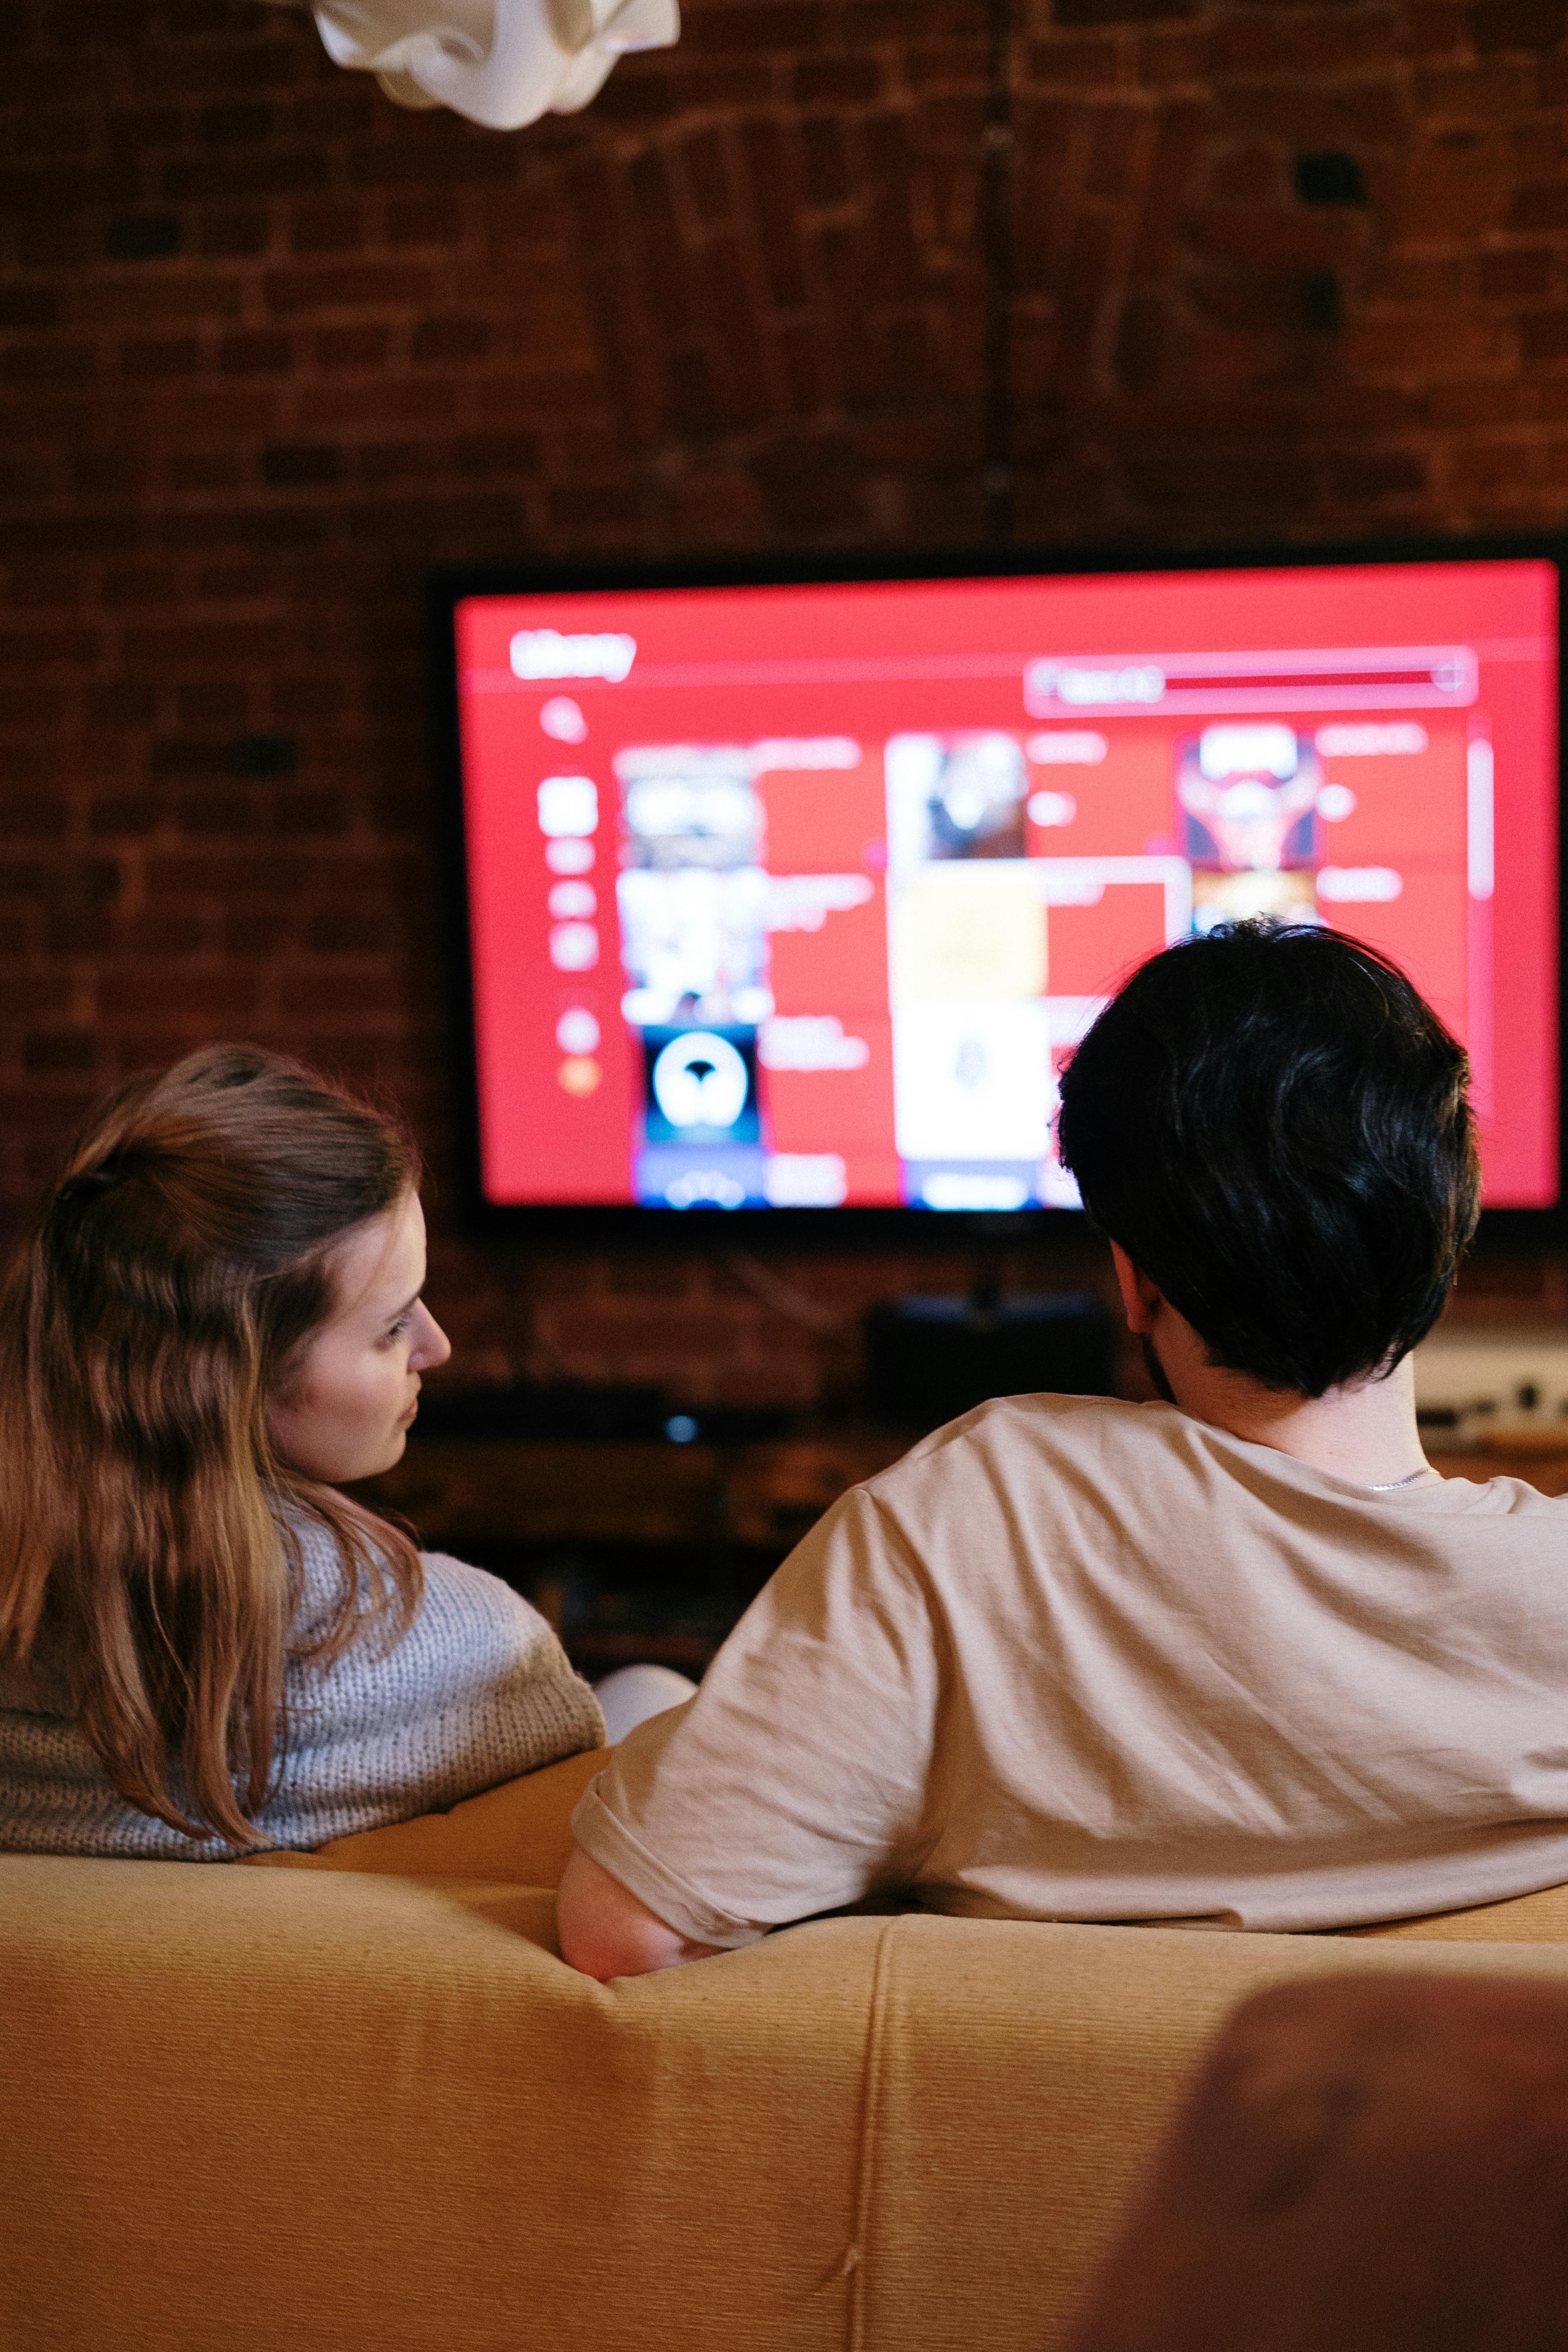 A couple watching on a television | Source: Pexels